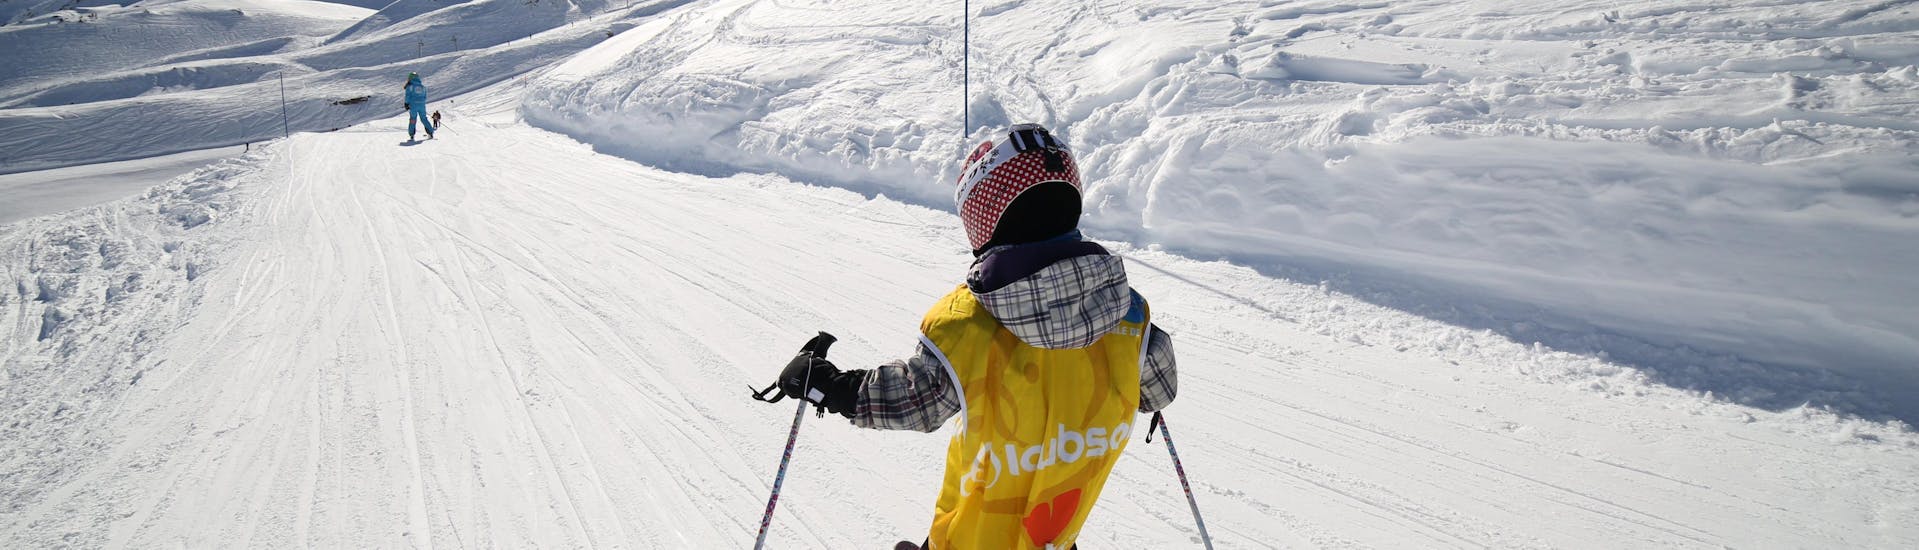 A youg skier is skiing down a snowy slope during his Kids Ski Lessons (3-6 years) - Holiday - All Levels with the ski school ESI Font Romeu.